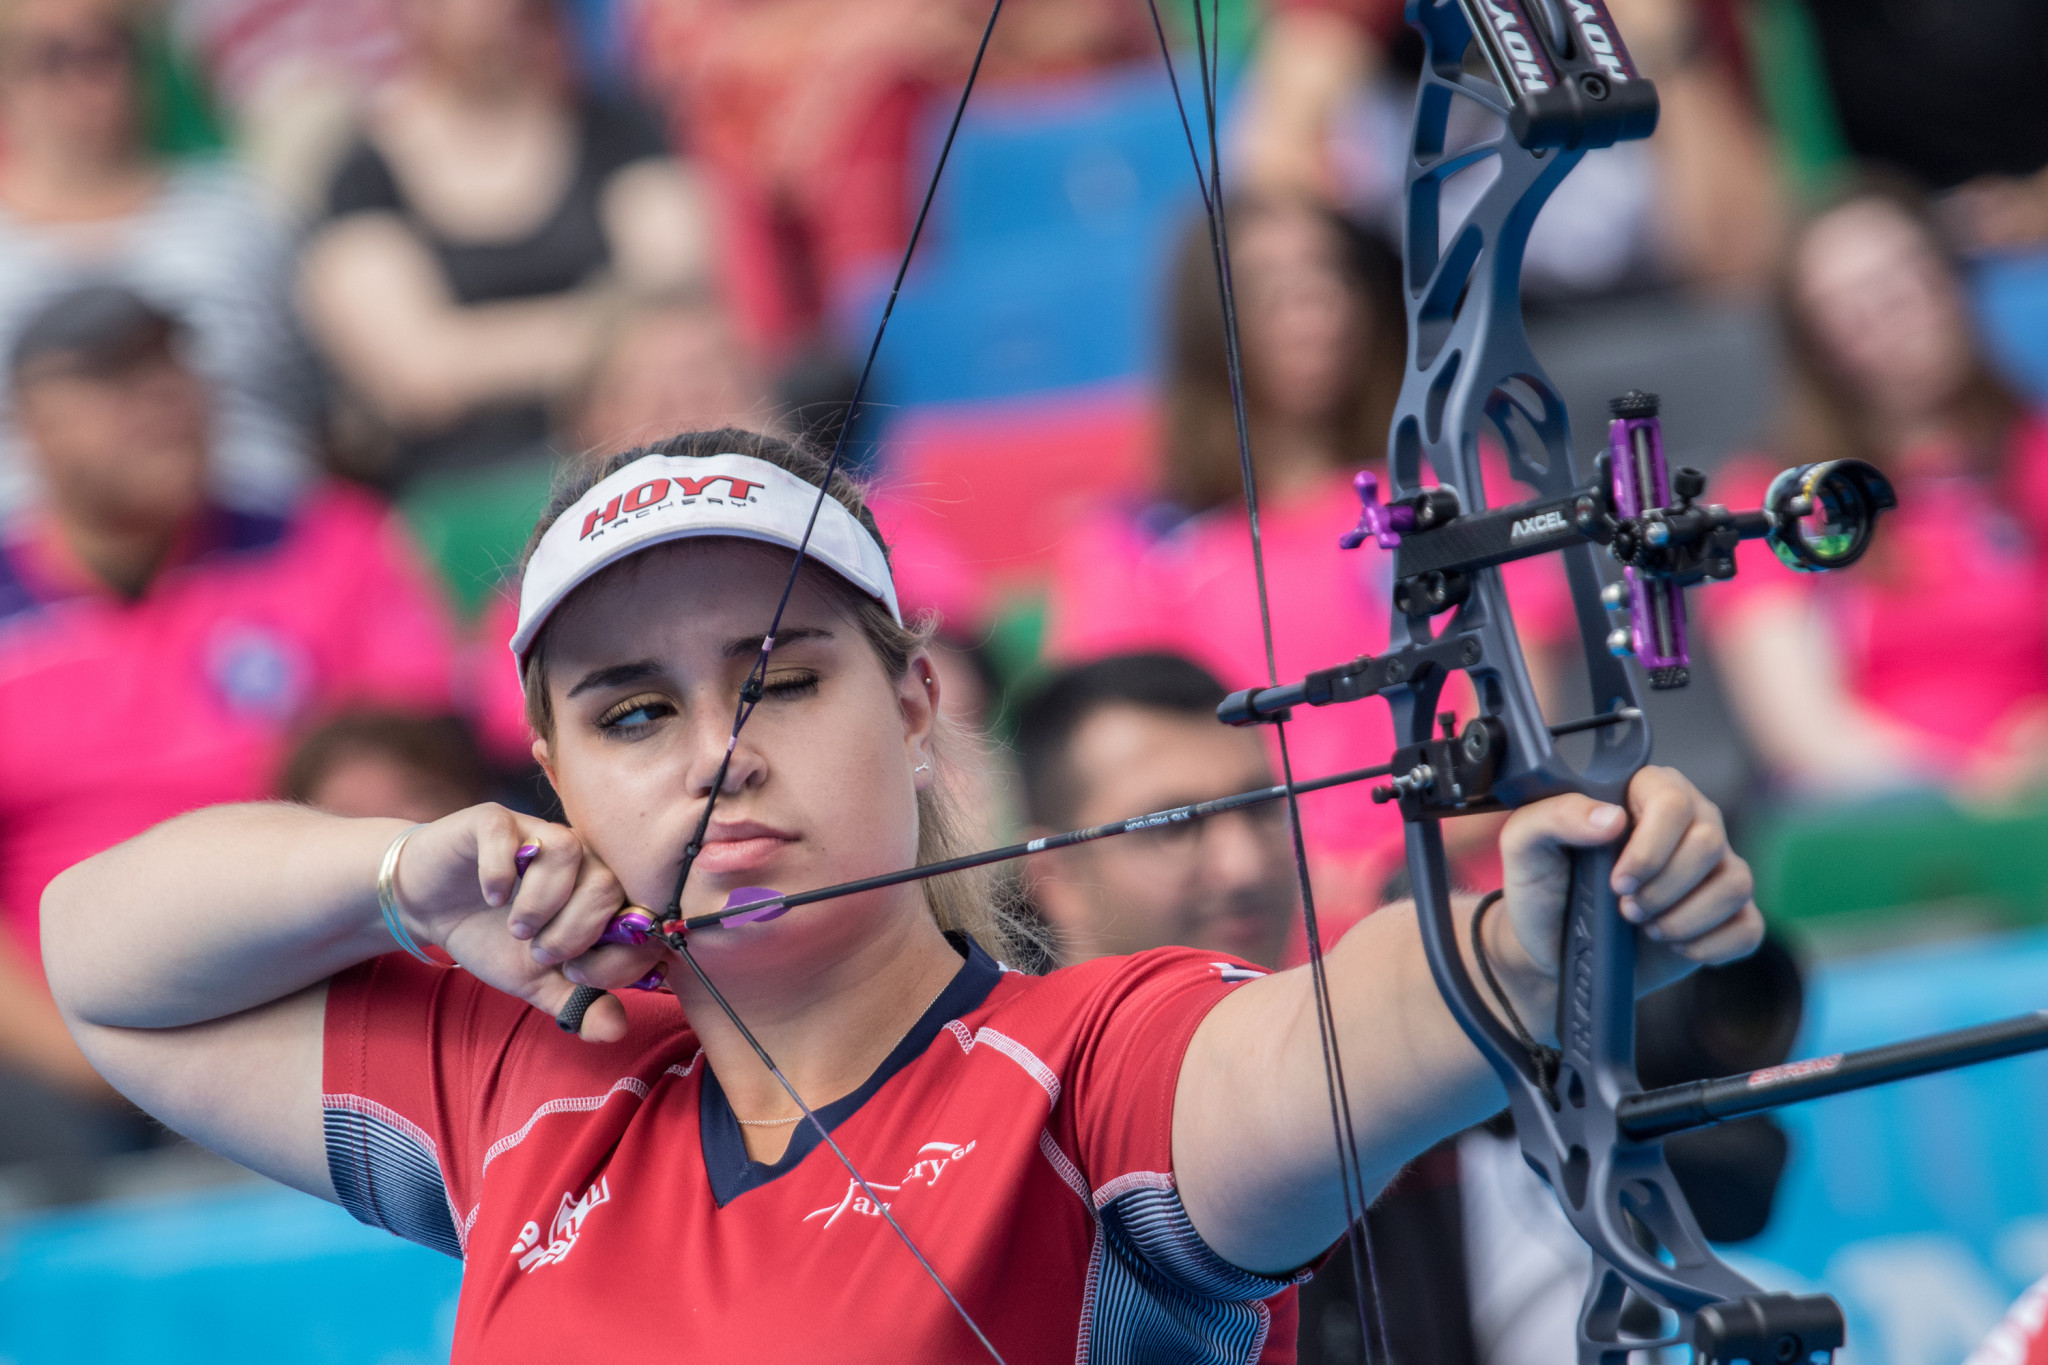 Britain's Ella Gibson beat Colombia's Alejandra Usquiano 147-145 to win women's compound gold at the Archery World Cup in Antalya ©Getty Images